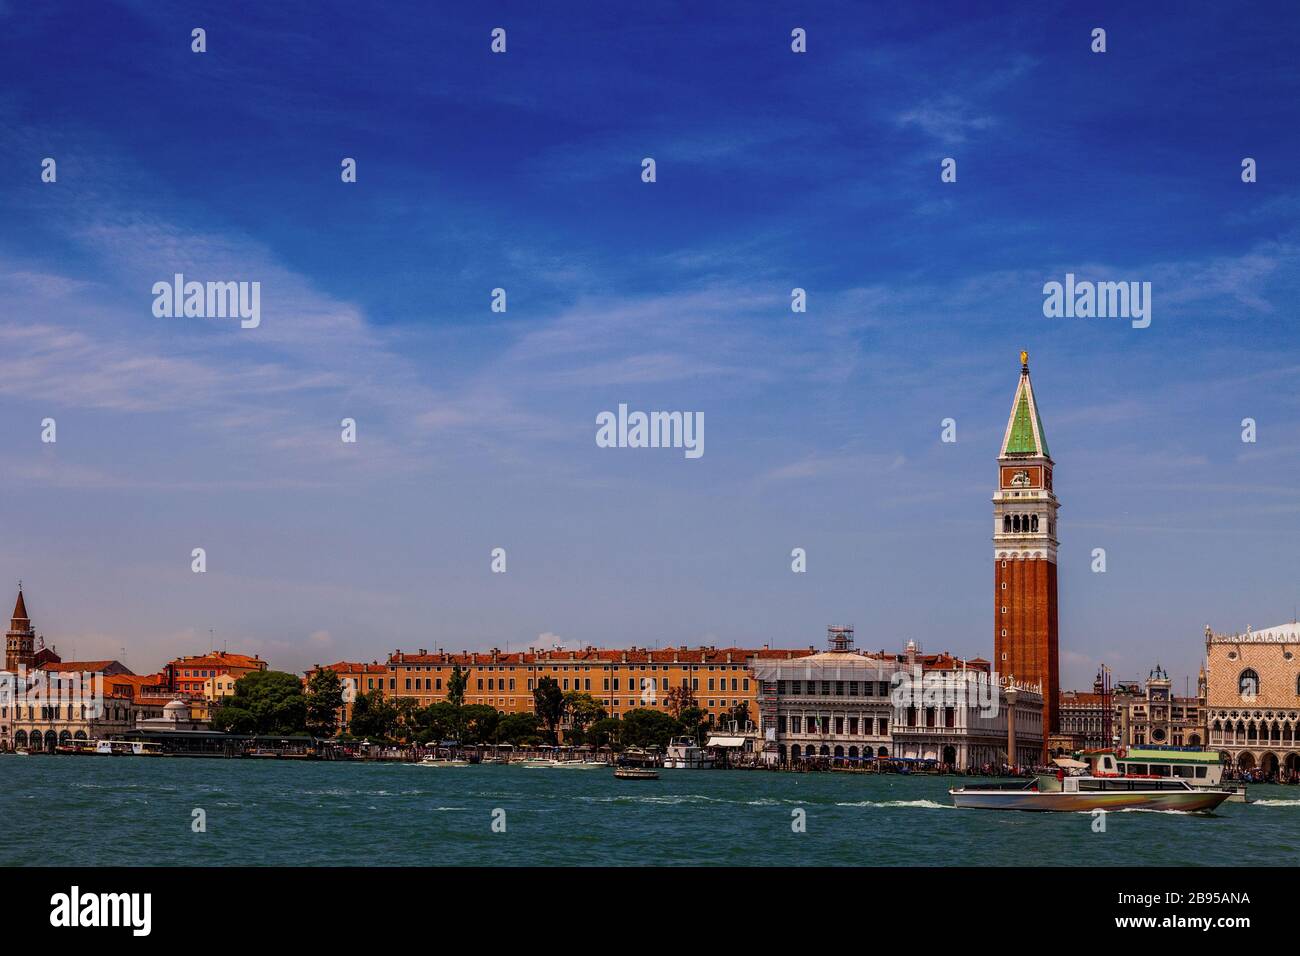 View out over the Grand Canal towards St. Mark's Square in Venice, Italy Stock Photo